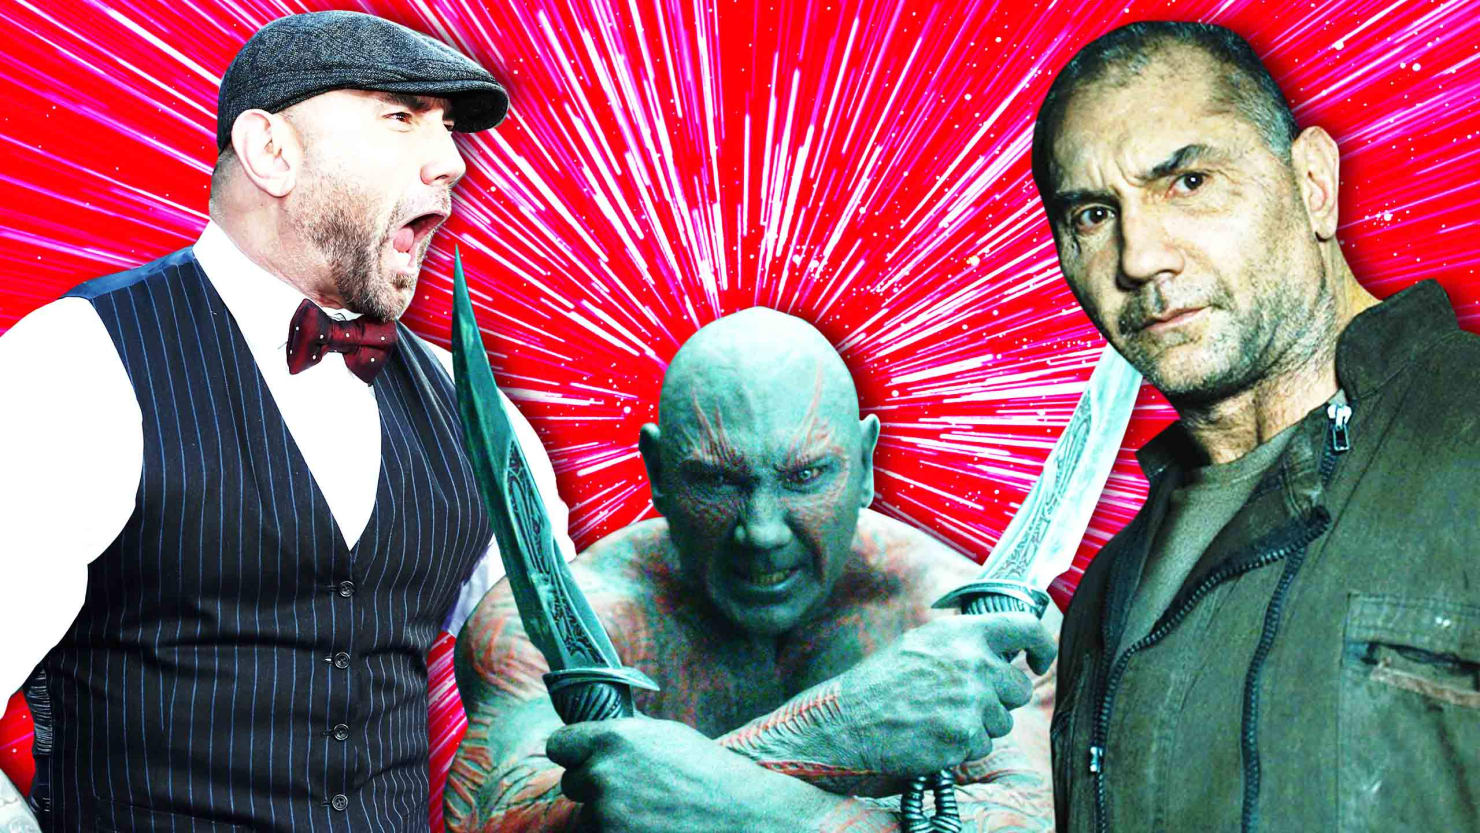 Dave Bautista was told he was too young for Blade Runner 2049 role